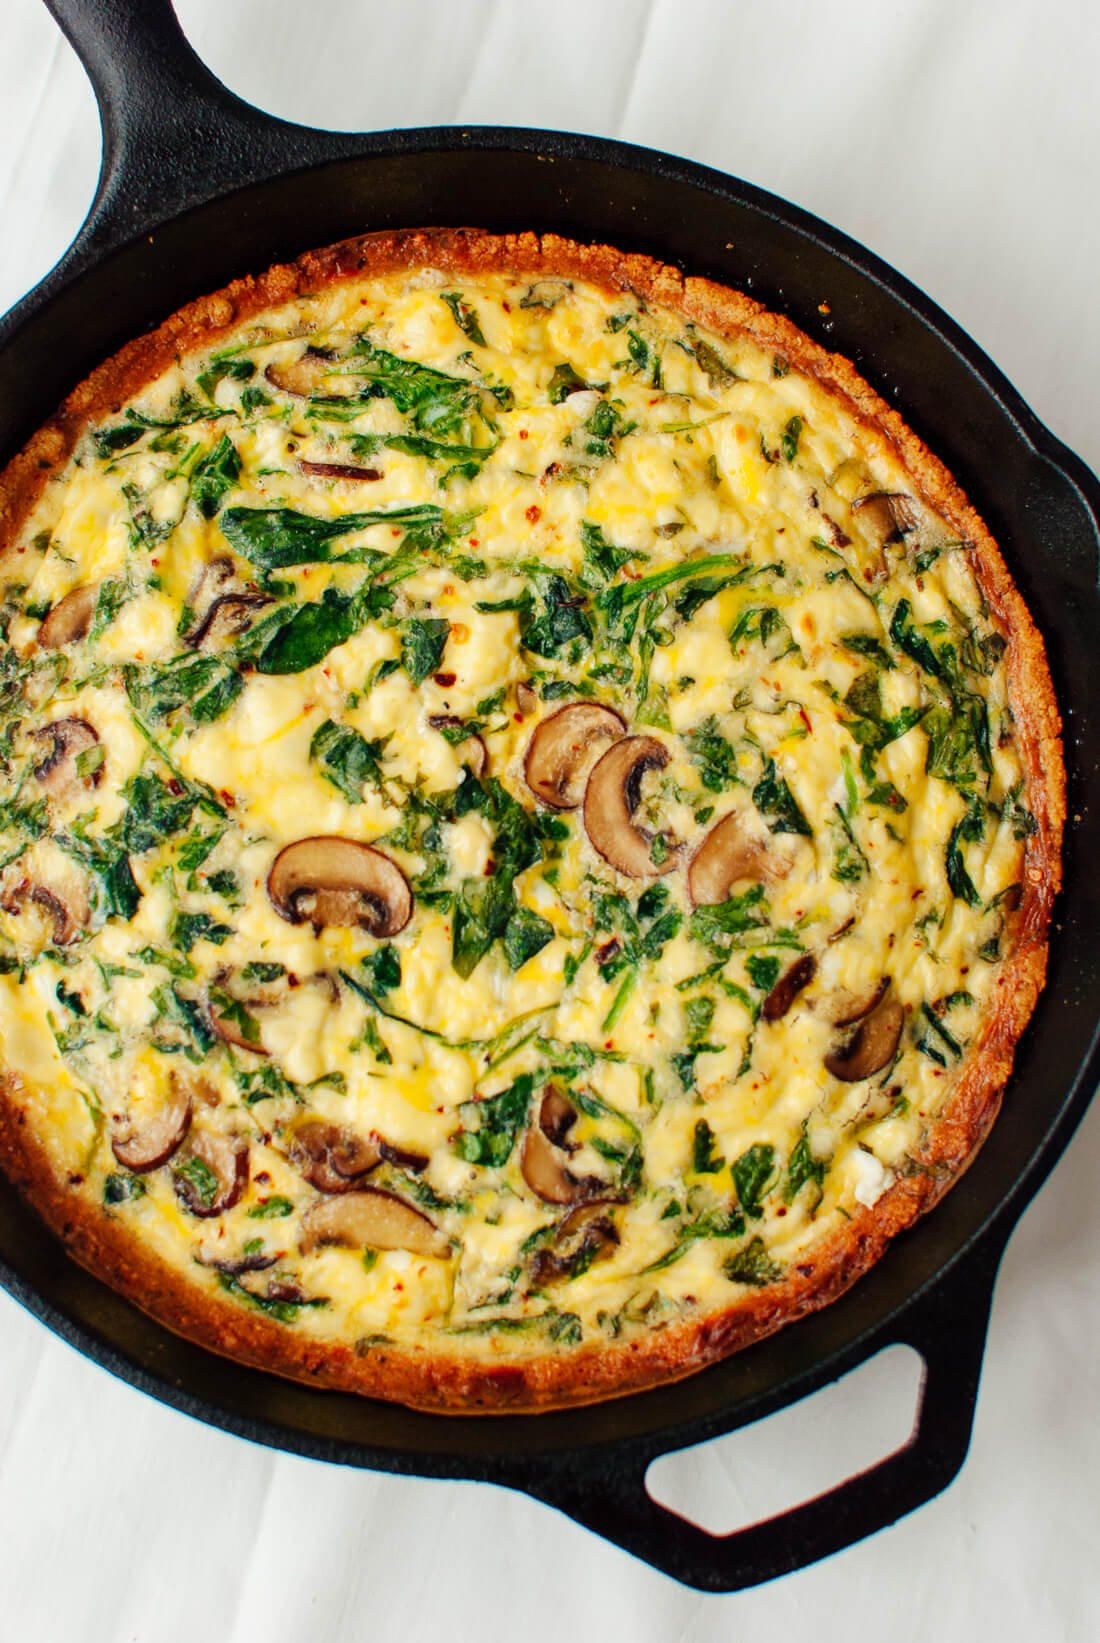 https://cookieandkate.com/images/2018/10/arugula-and-cremini-quiche-with-gluten-free-almond-meal-crust-3.jpg